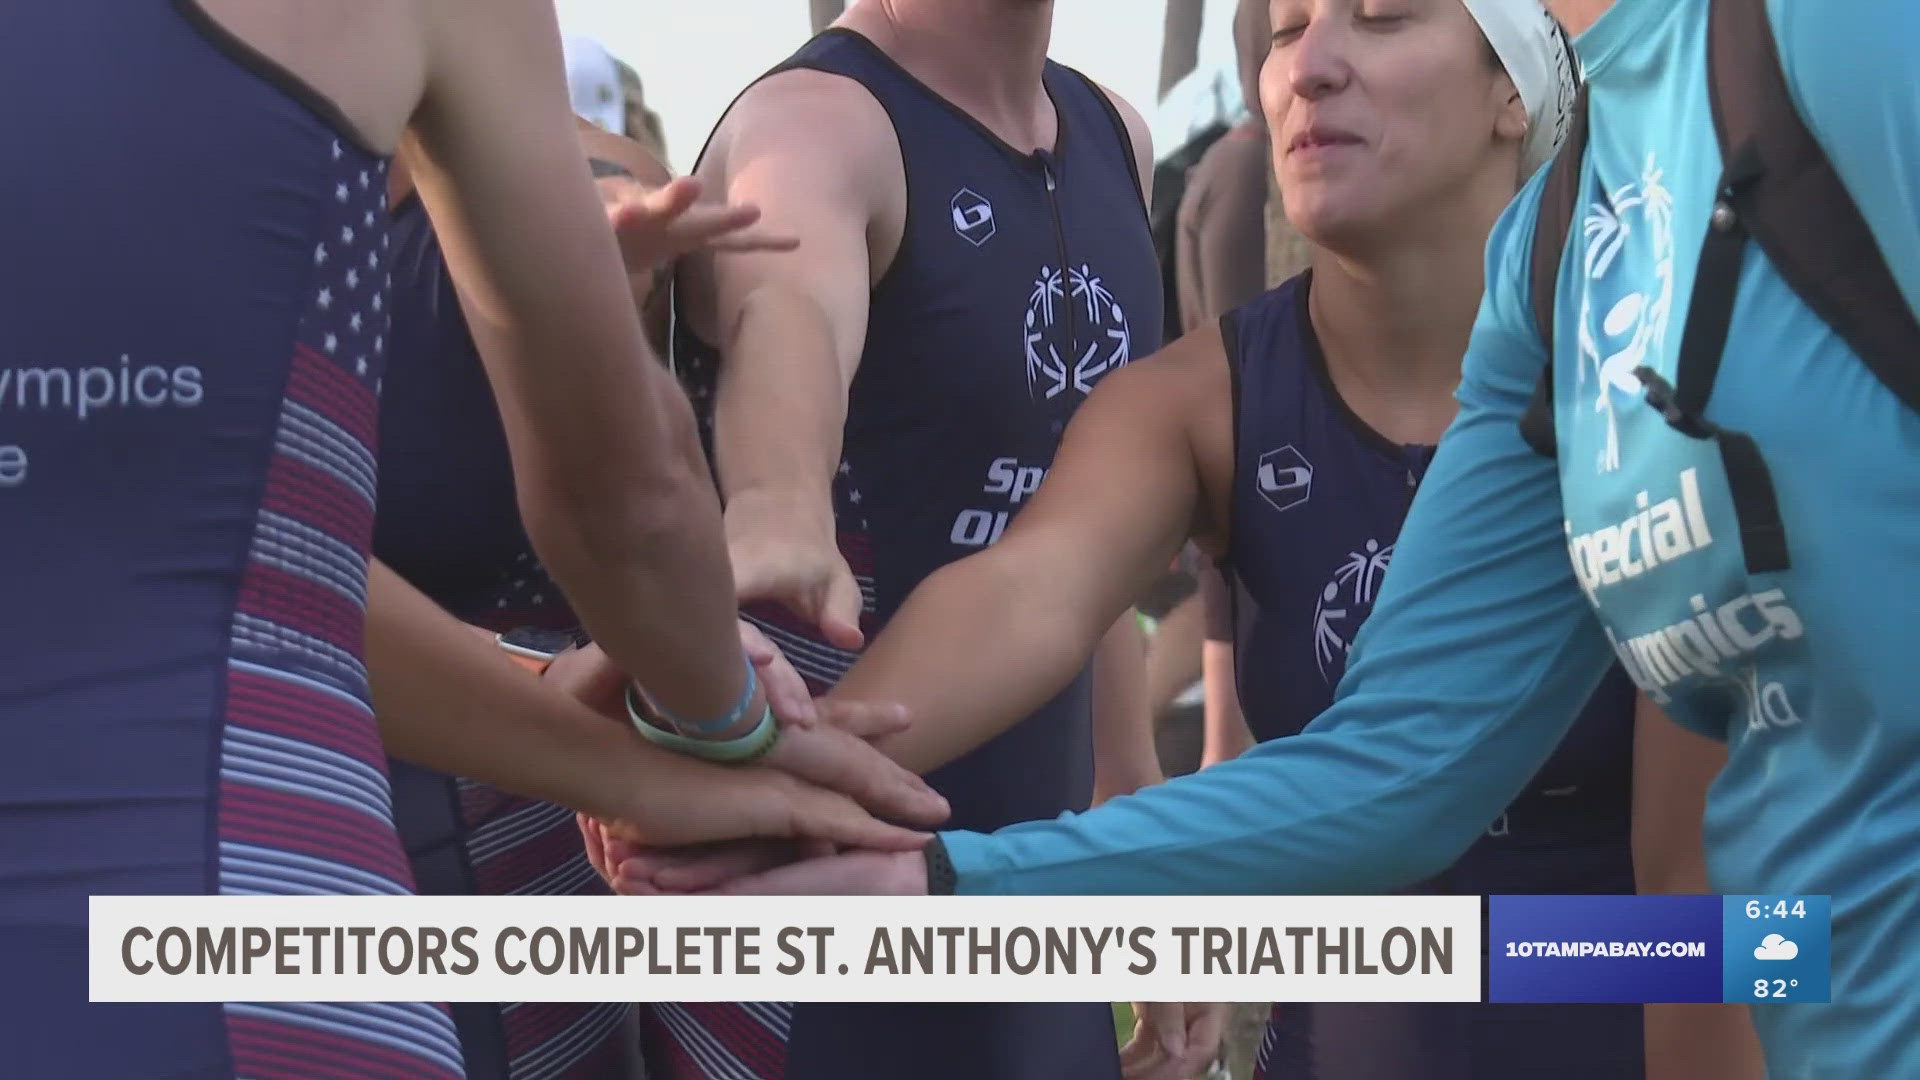 Thousands of athletes completed the St. Anthony's Triathlon in St. Petersburg.